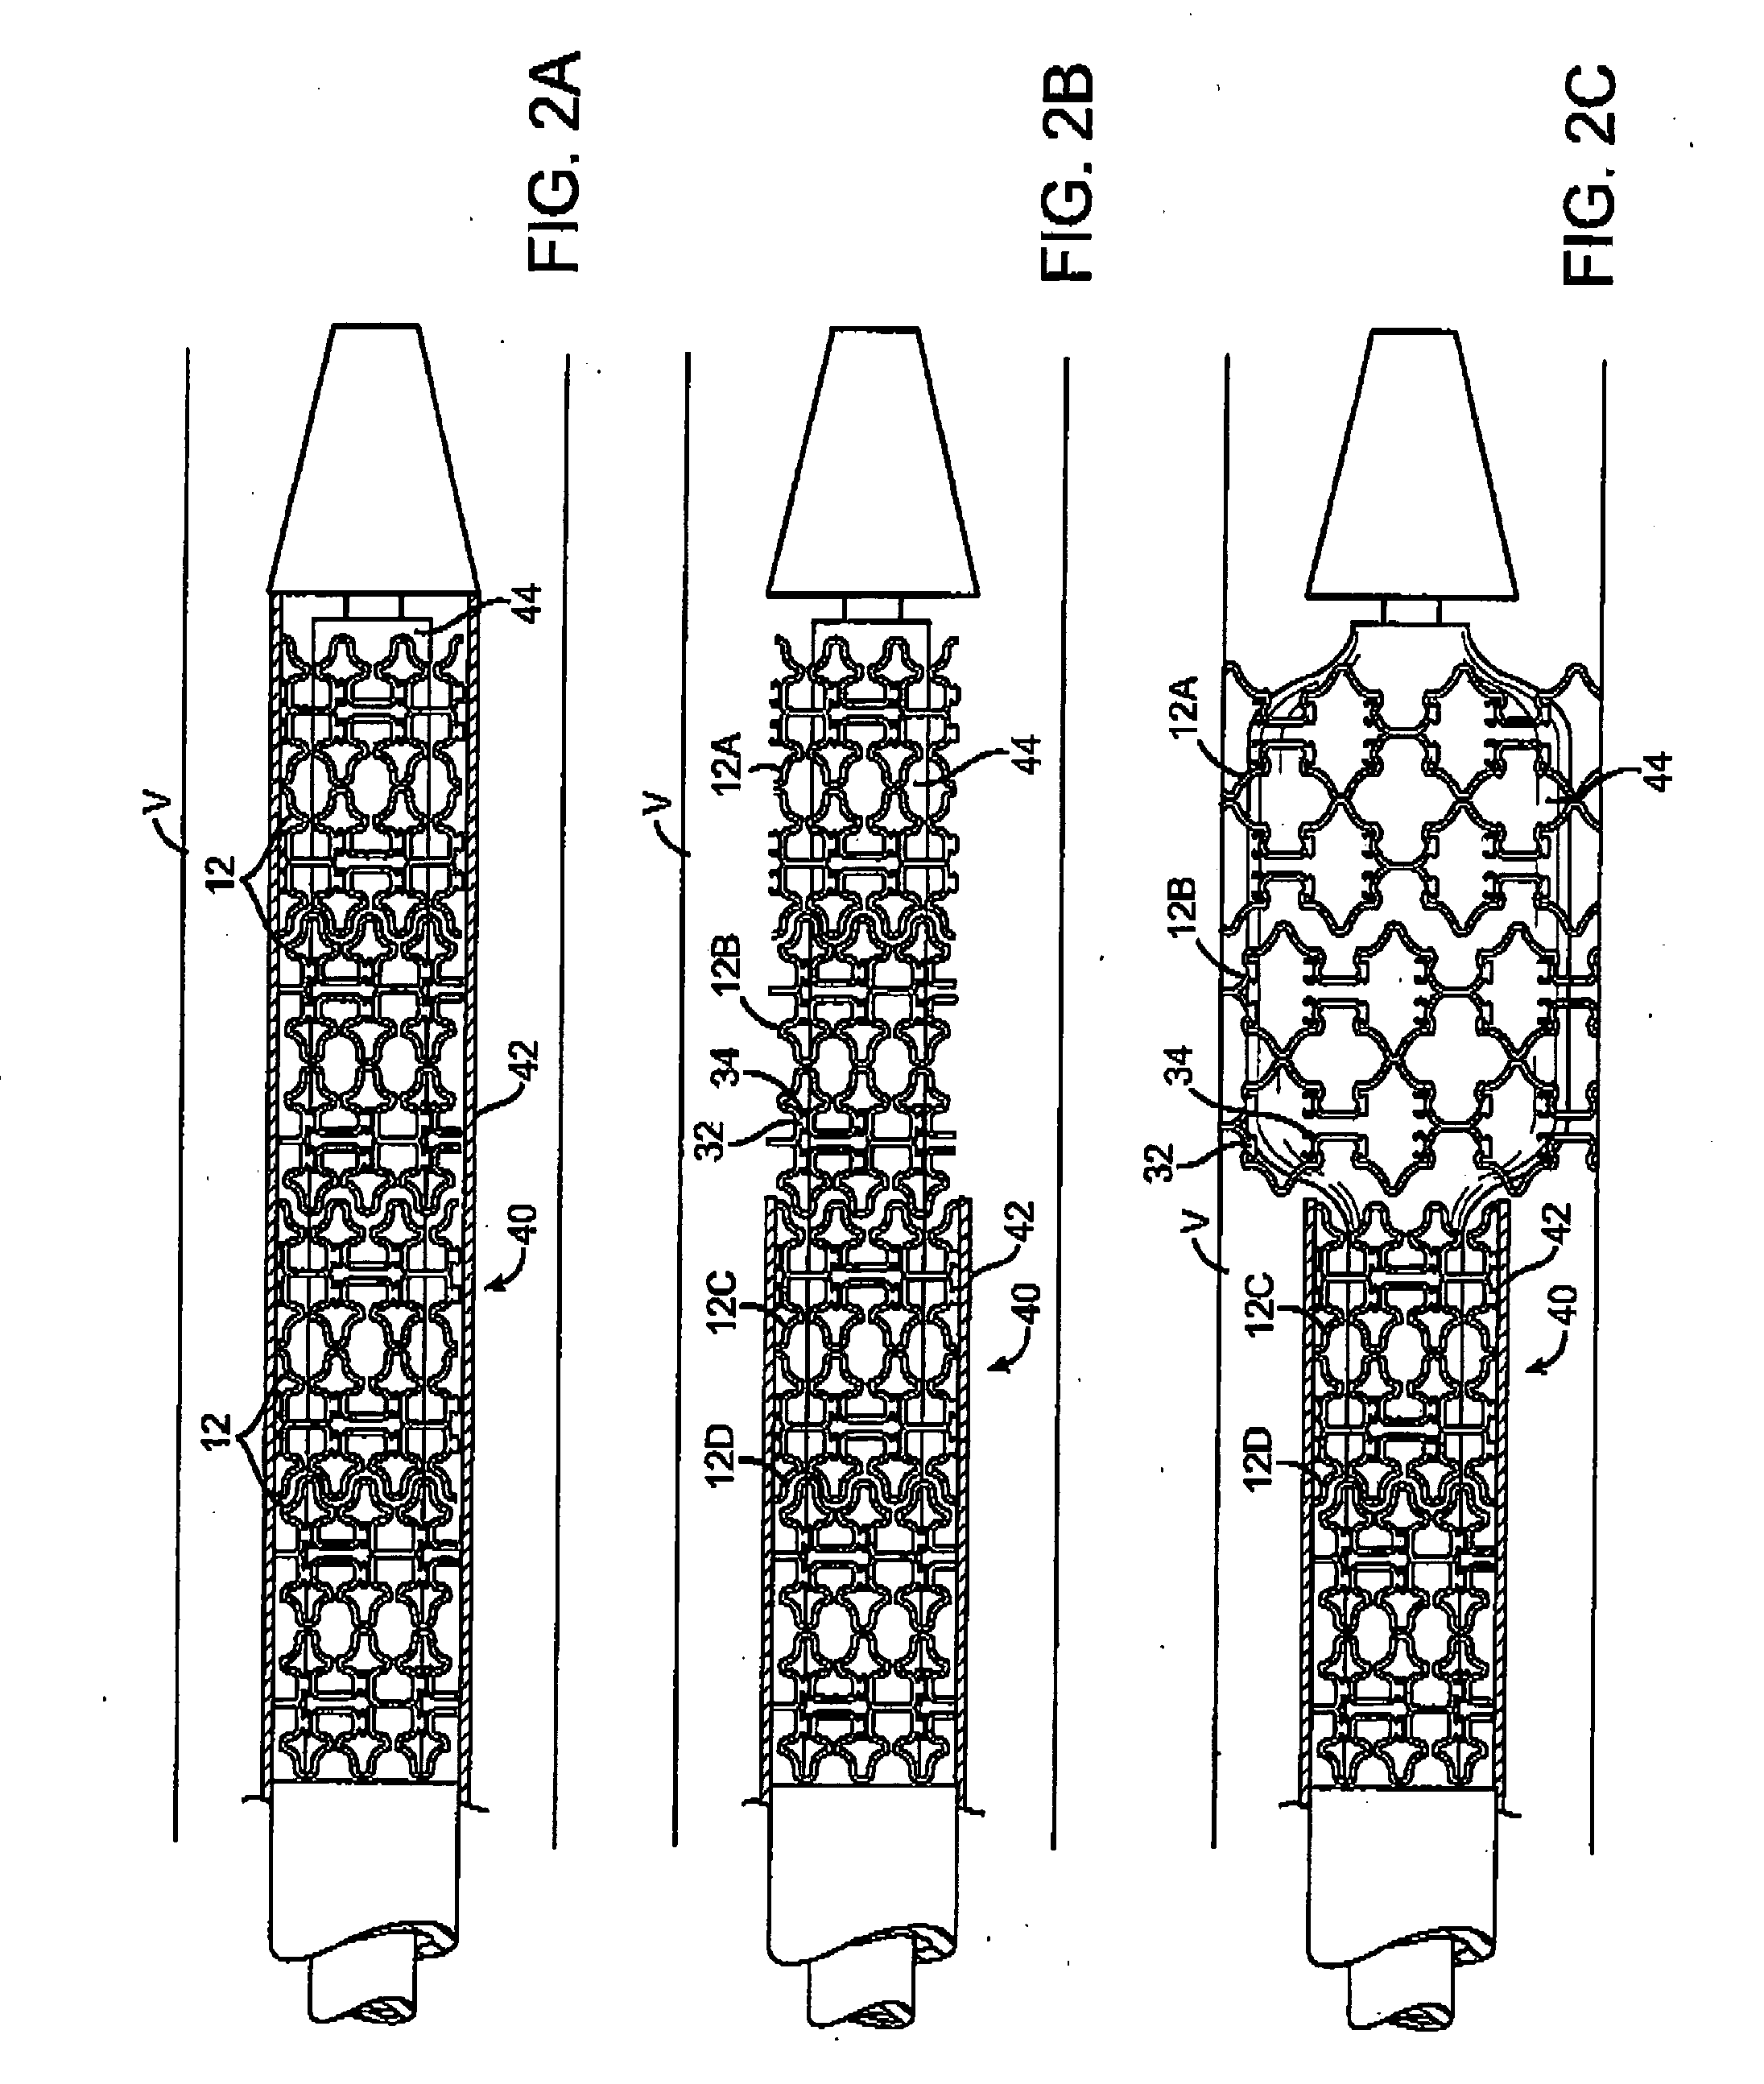 Self-constrained segmented stents and methods for their deployment